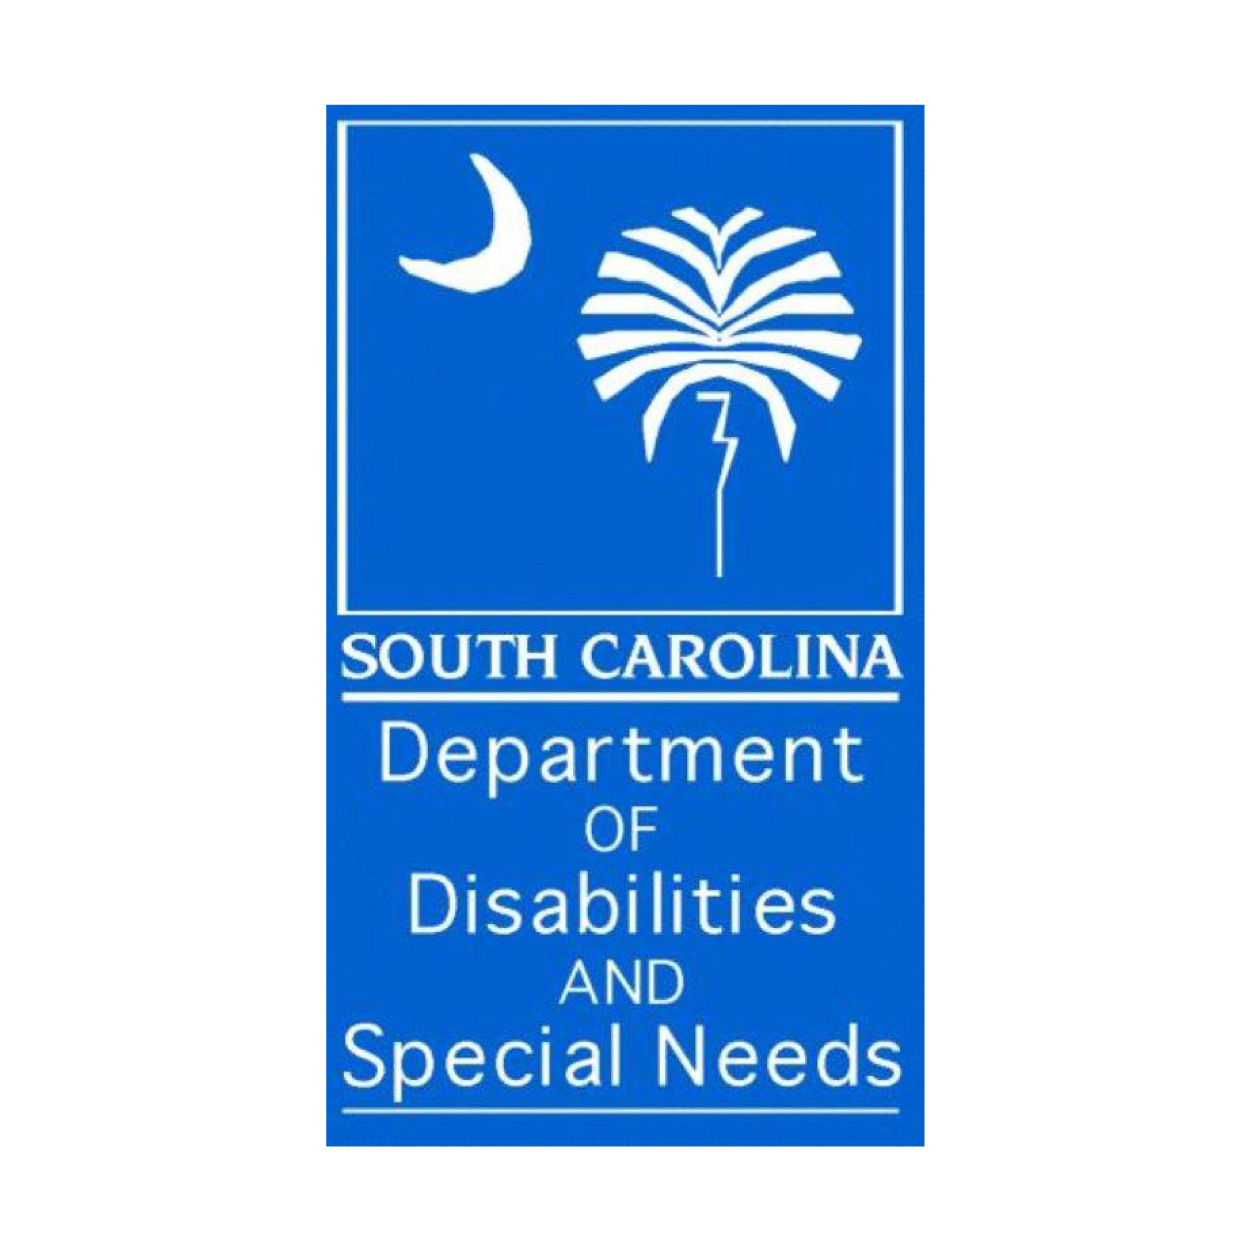 SC Department of Disabilities and Special Needs